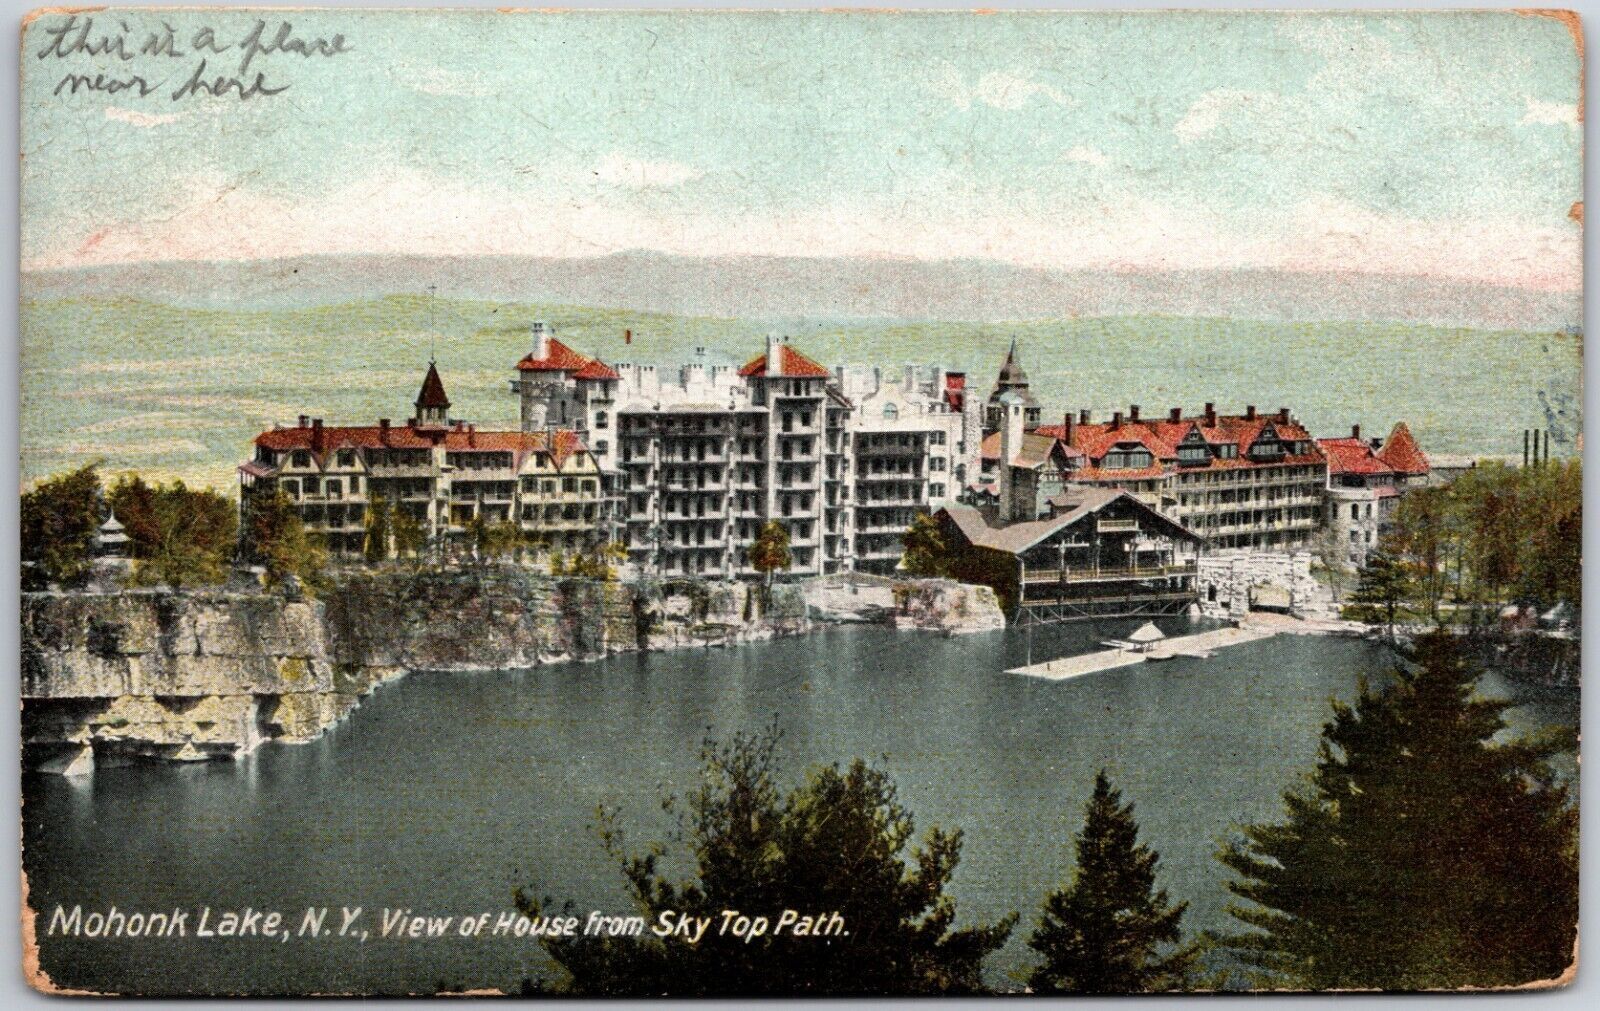 Mohonk Lake NY-New York, 1903 View of House Hotel Sky Top Path Old Postcard